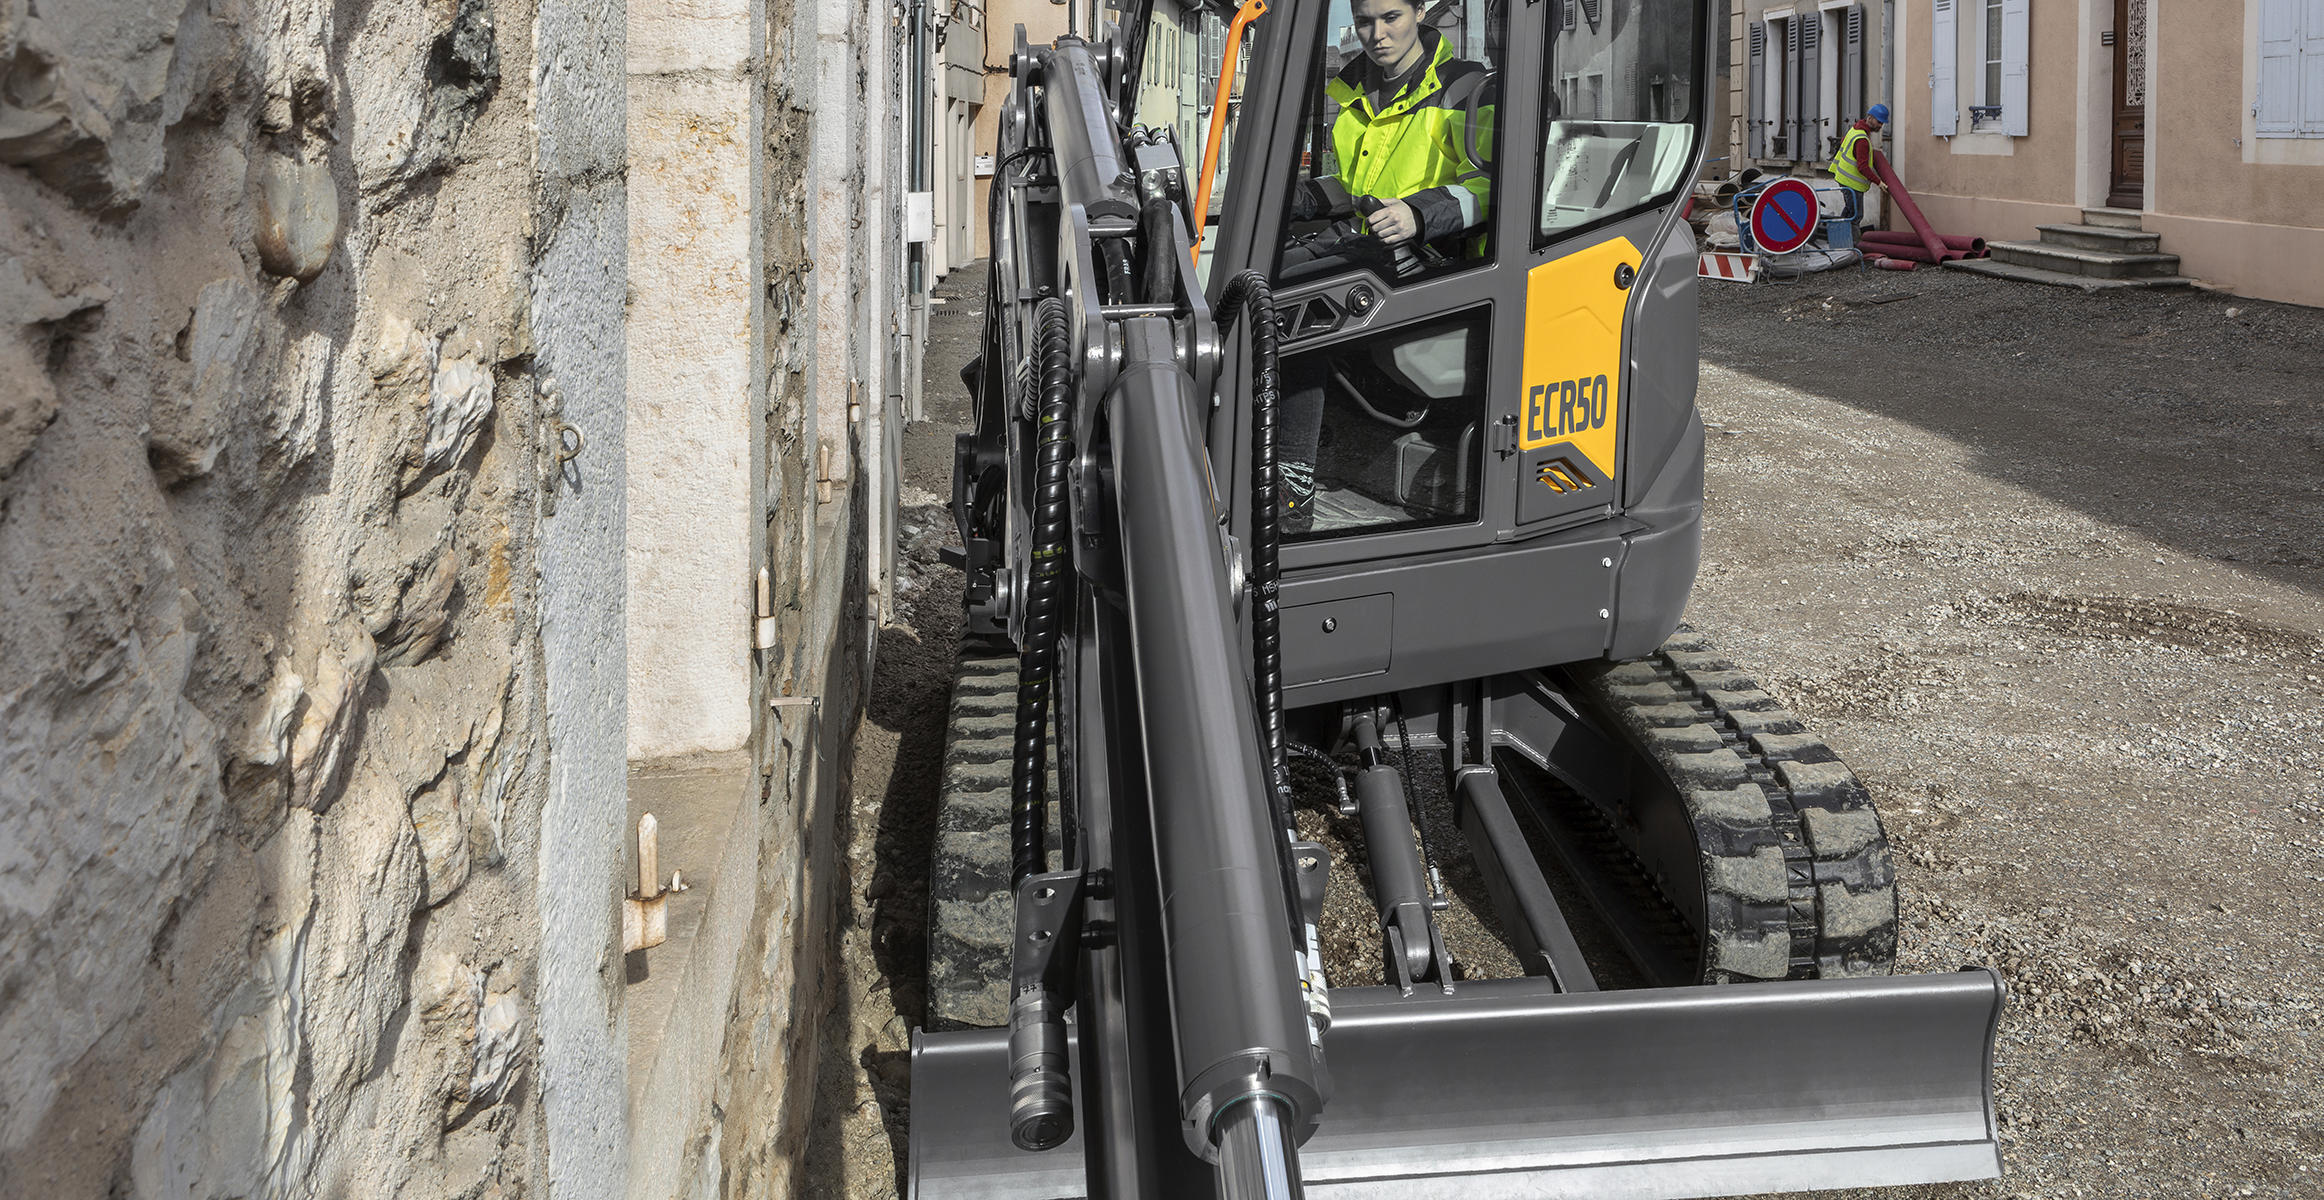 Volvo Introduces the new ECR50 Compact Excavator | The HeavyQuip